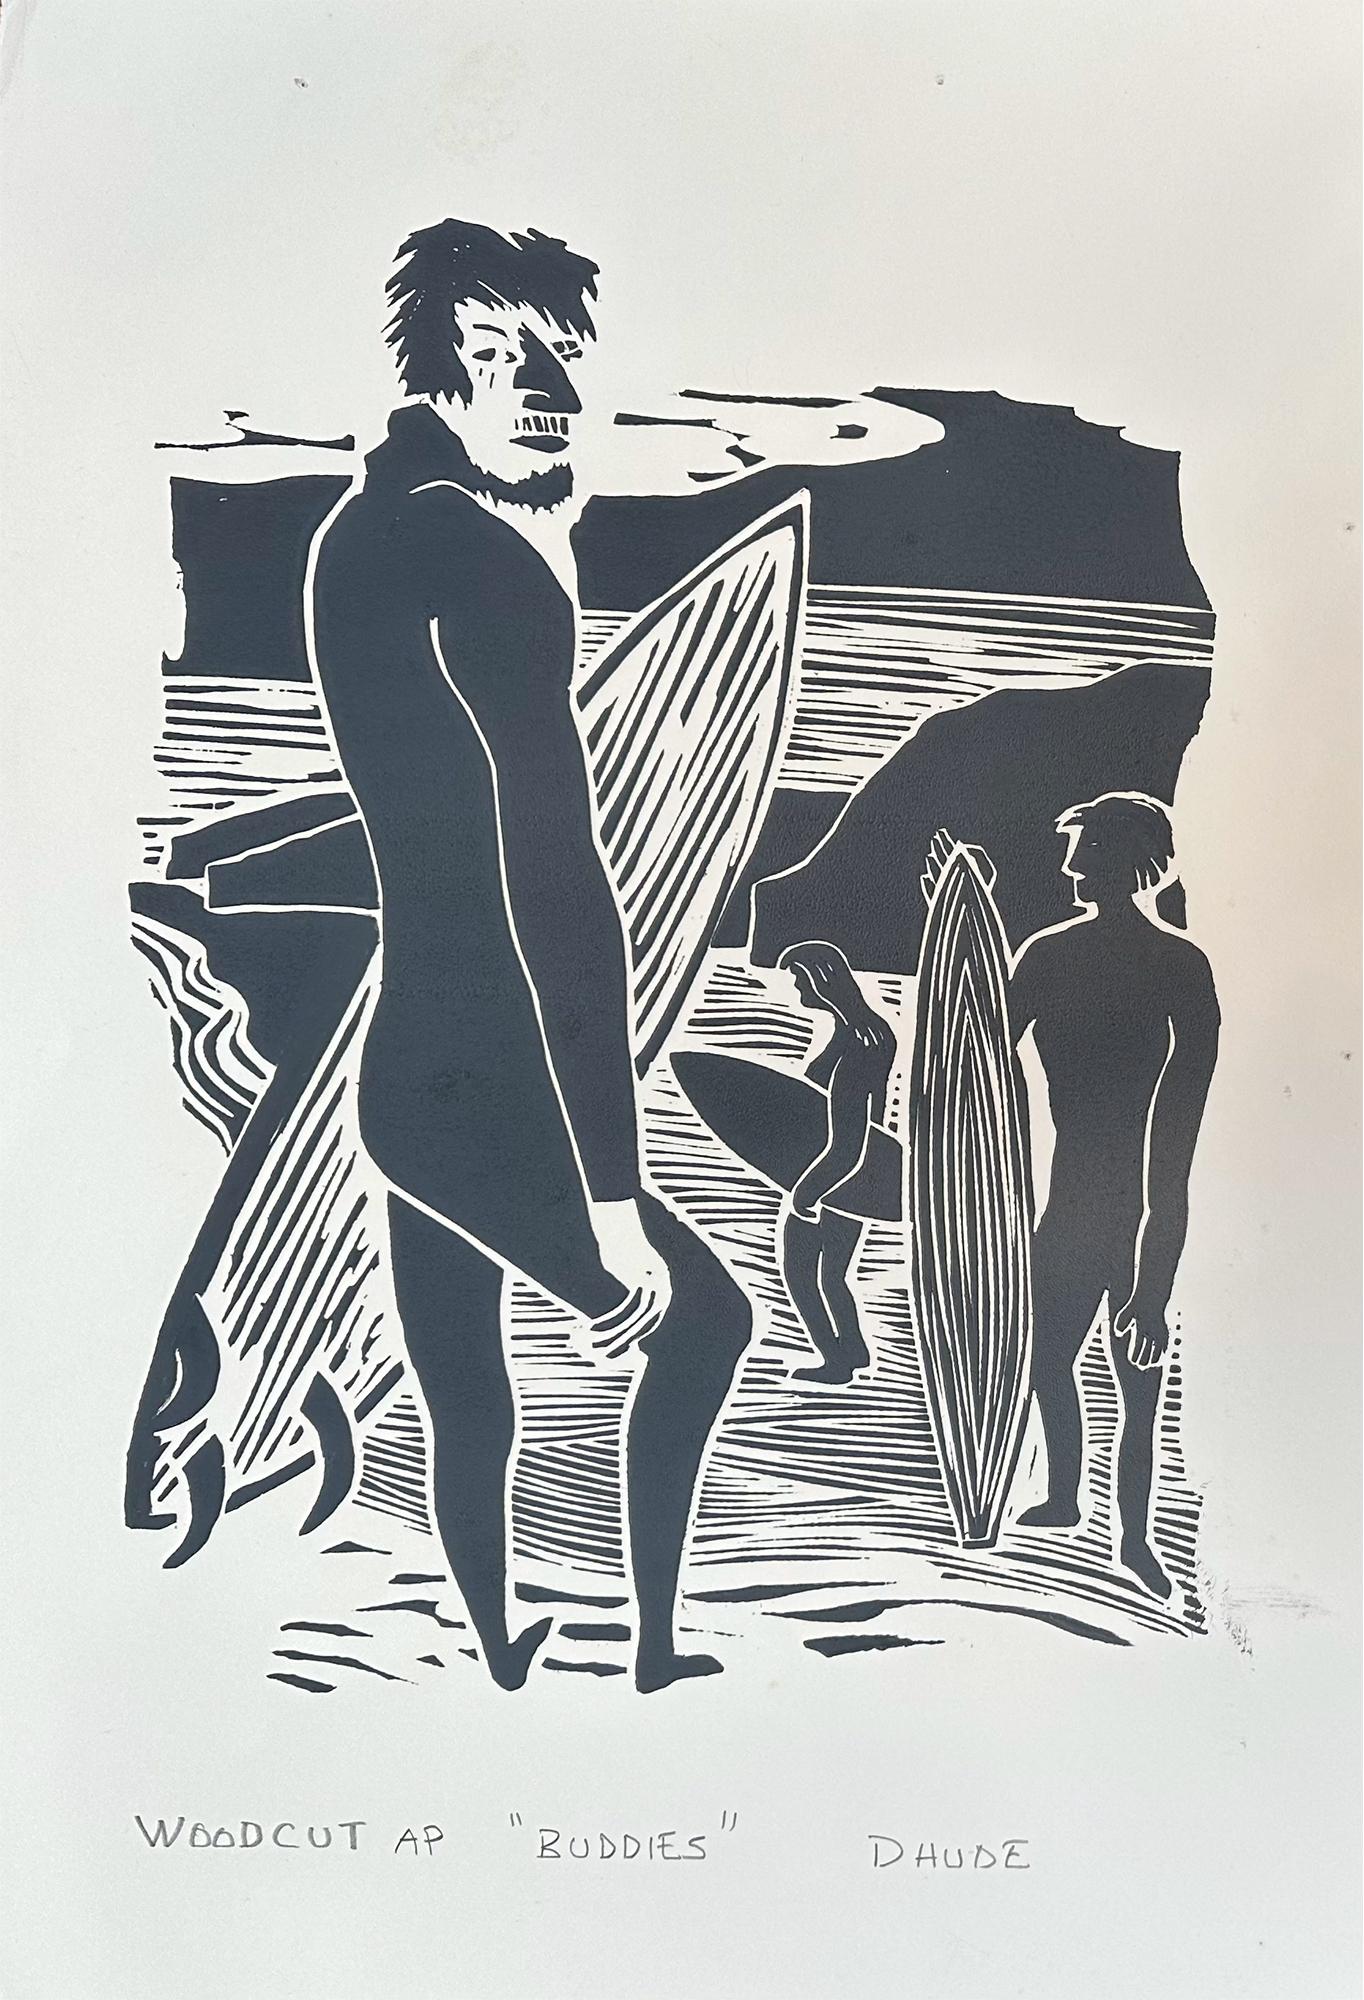 Buddies - Surfing Art - Figurative - Woodcut Print By Marc Zimmerman

Limited Edition 01/04

This masterwork is exhibited in the Zimmerman Gallery, Carmel CA.

Immerse yourself in the captivating world of surfing and ocean vibes with Marc